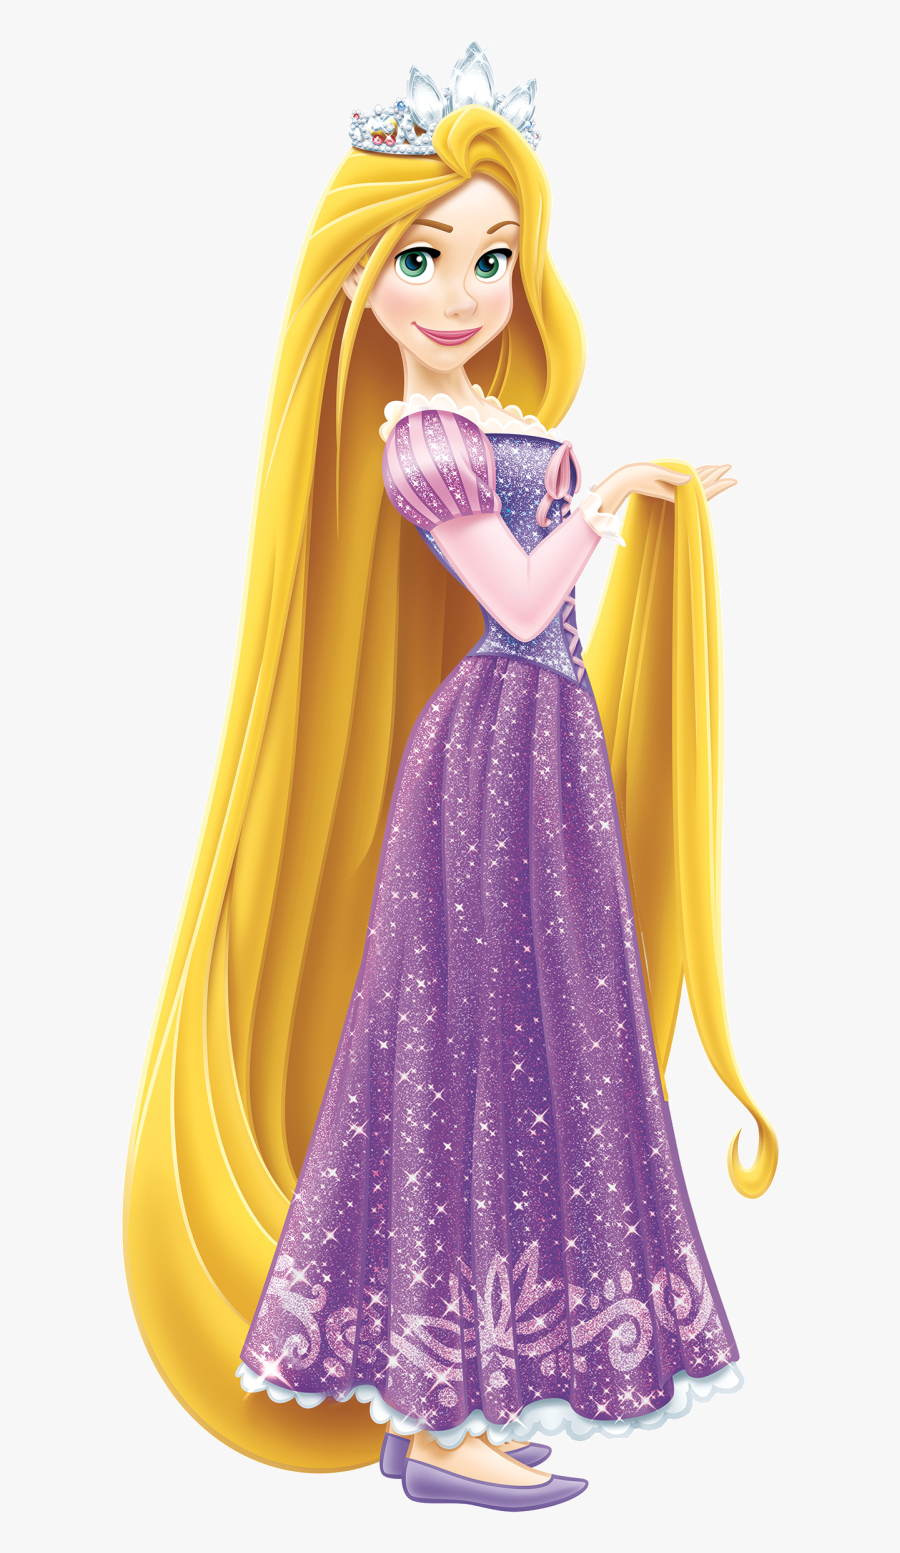 Elsa Hair Png Authorised Vippng Carisca Wallpaper